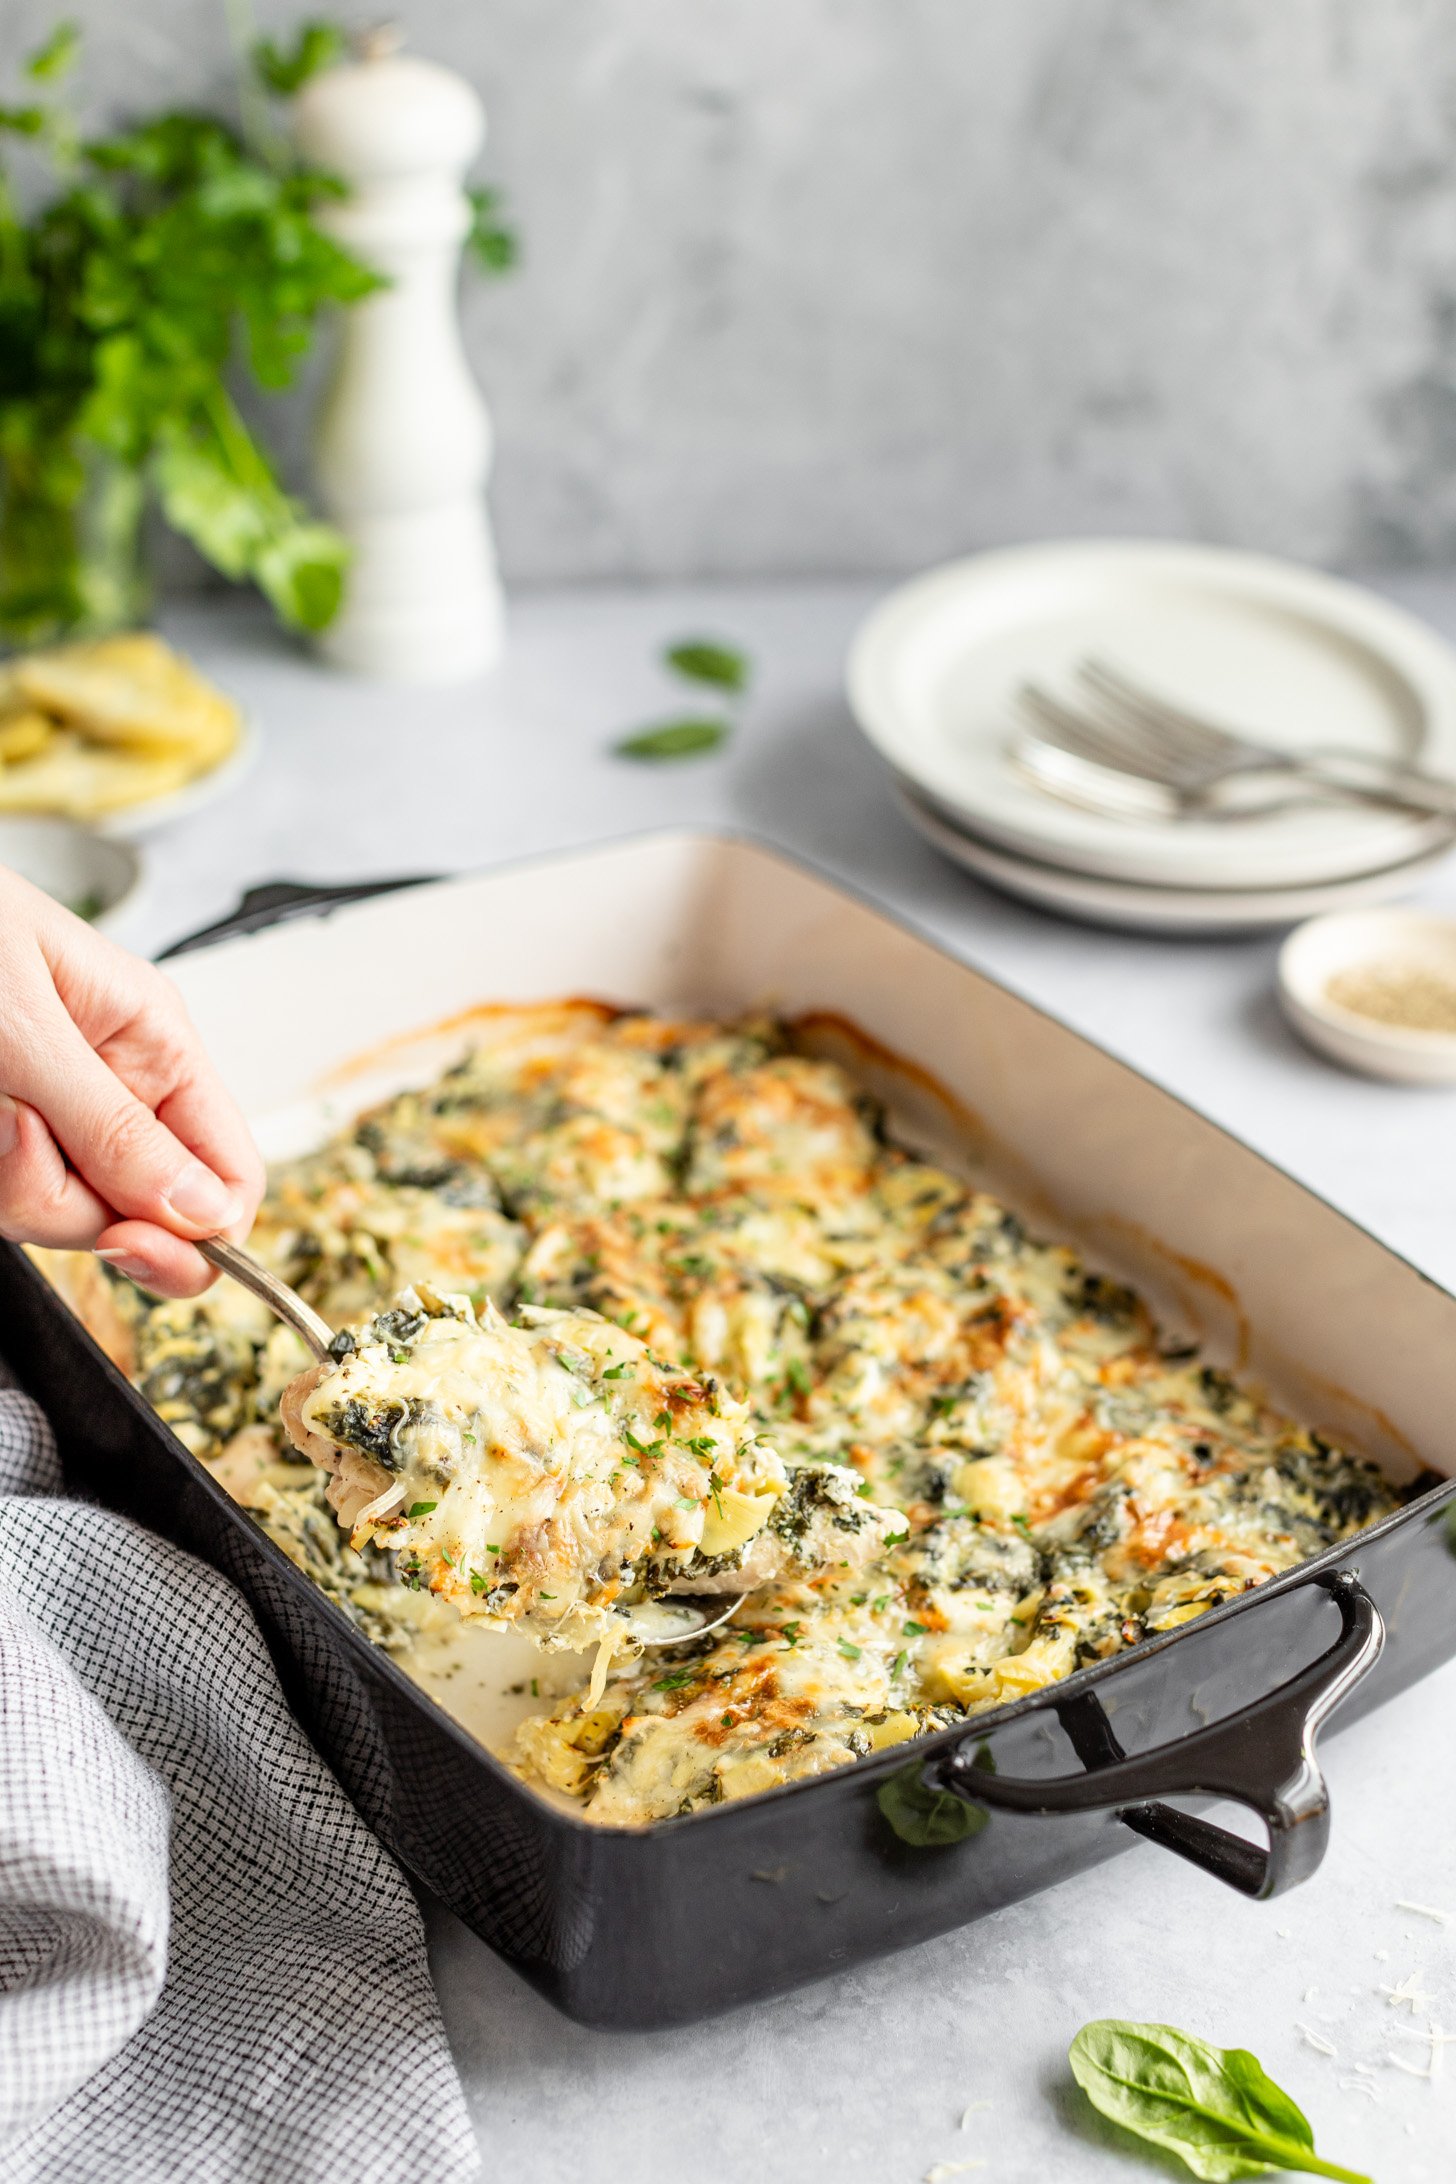 A hand holding a spoon taking a helping of Creamy Chicken Spinach Artichoke Bake out of a casserole dish. Casserole dish is sitting on a countertop and surrounded by a napkin, a few empty dishes topped with forks, small dishes containing various ingredients and some Parmesan cheese and spinach leaves spilled on countertop.